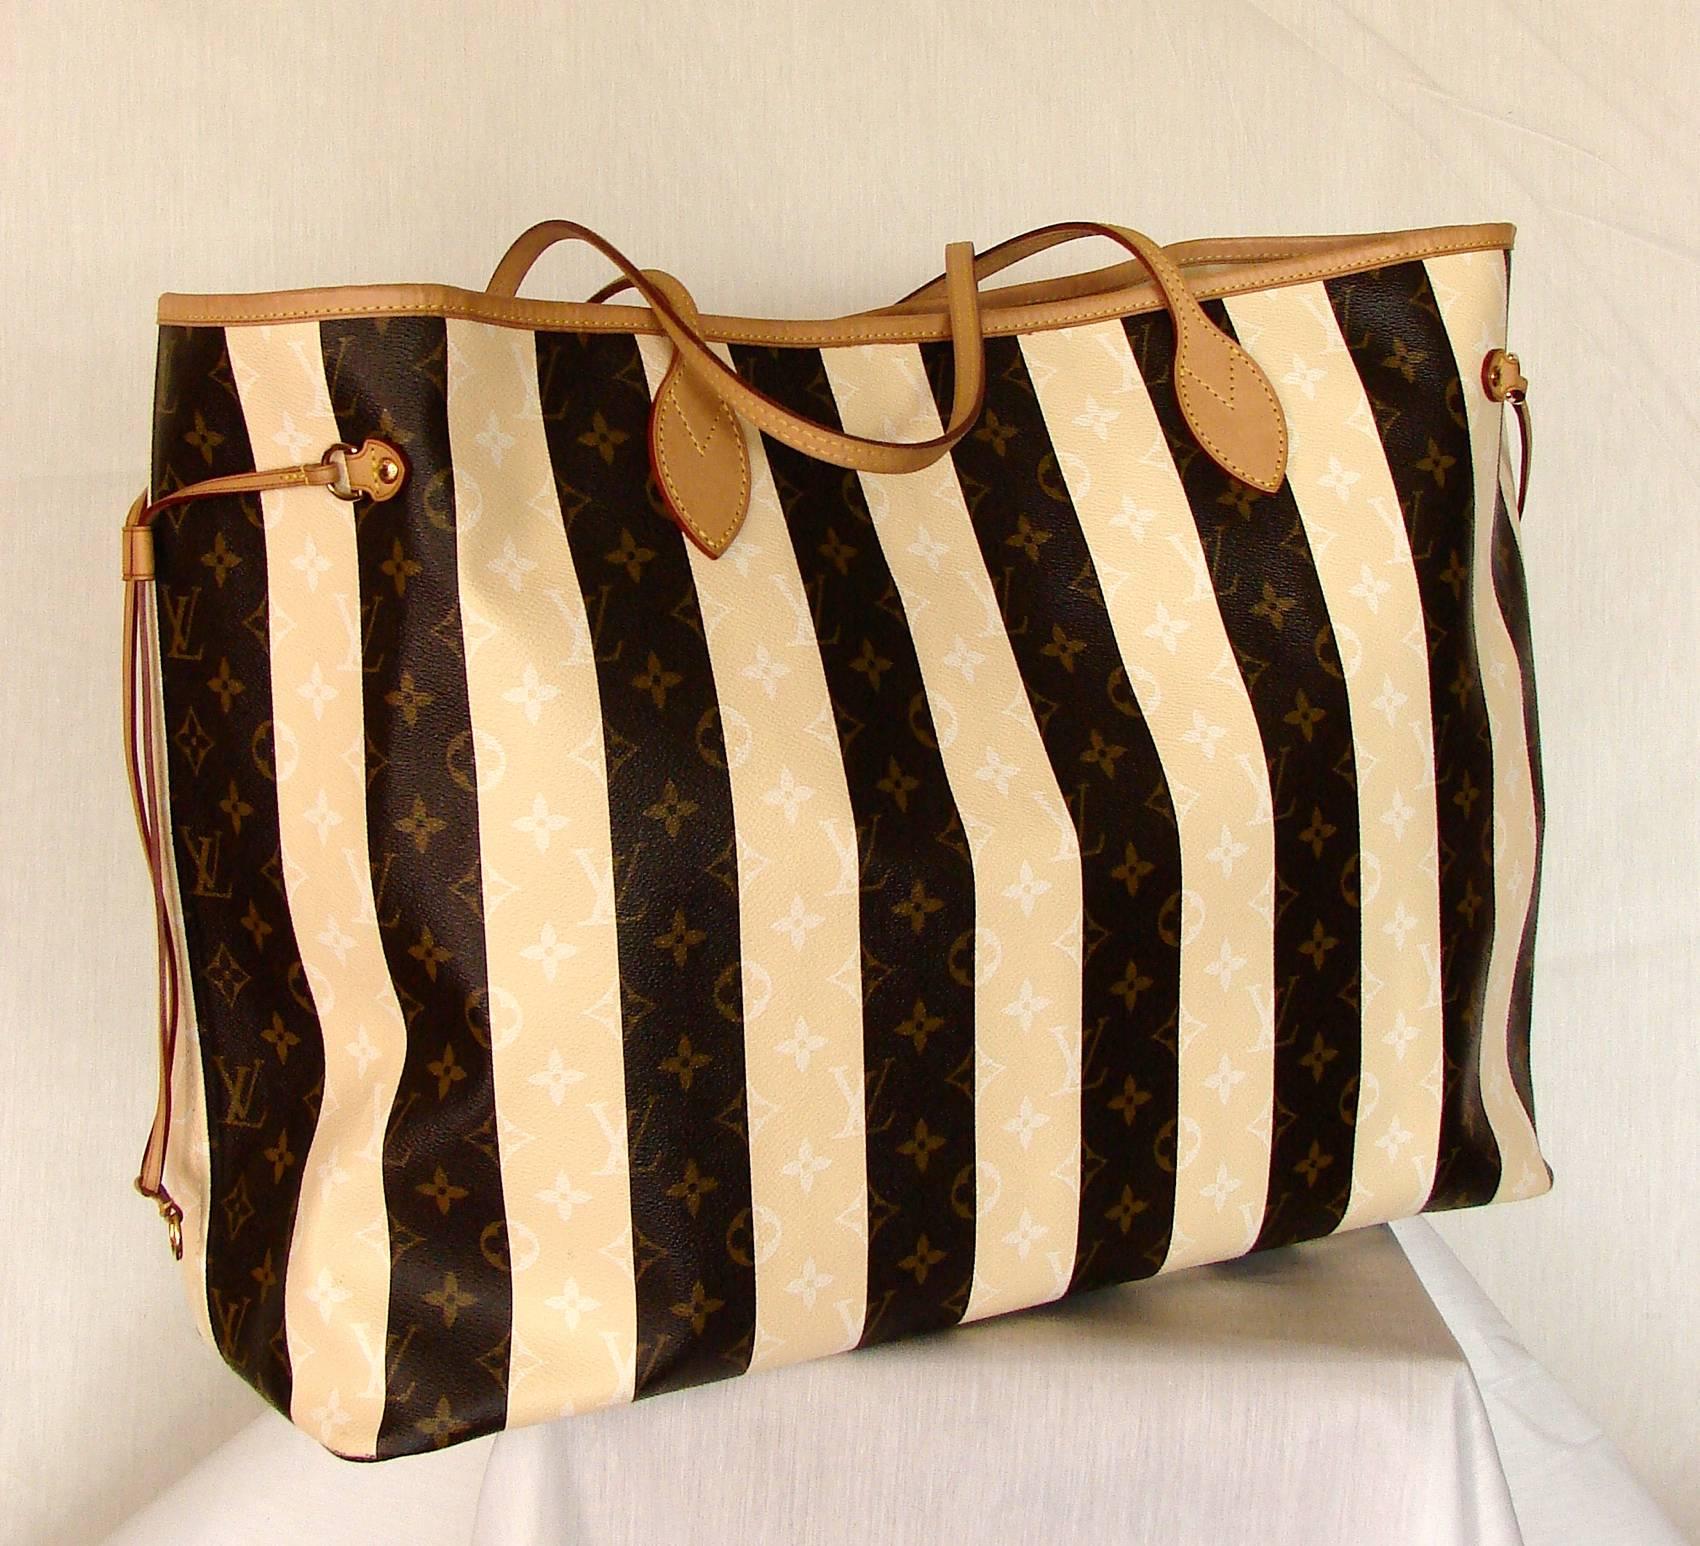 The Louis Vuitton Rayures line was inspired by the à rayures or striped steamer trunks introduced by the house before the turn of the century.  This piece was created in 2011 as a limited edition for VIP clients and is a much larger version of